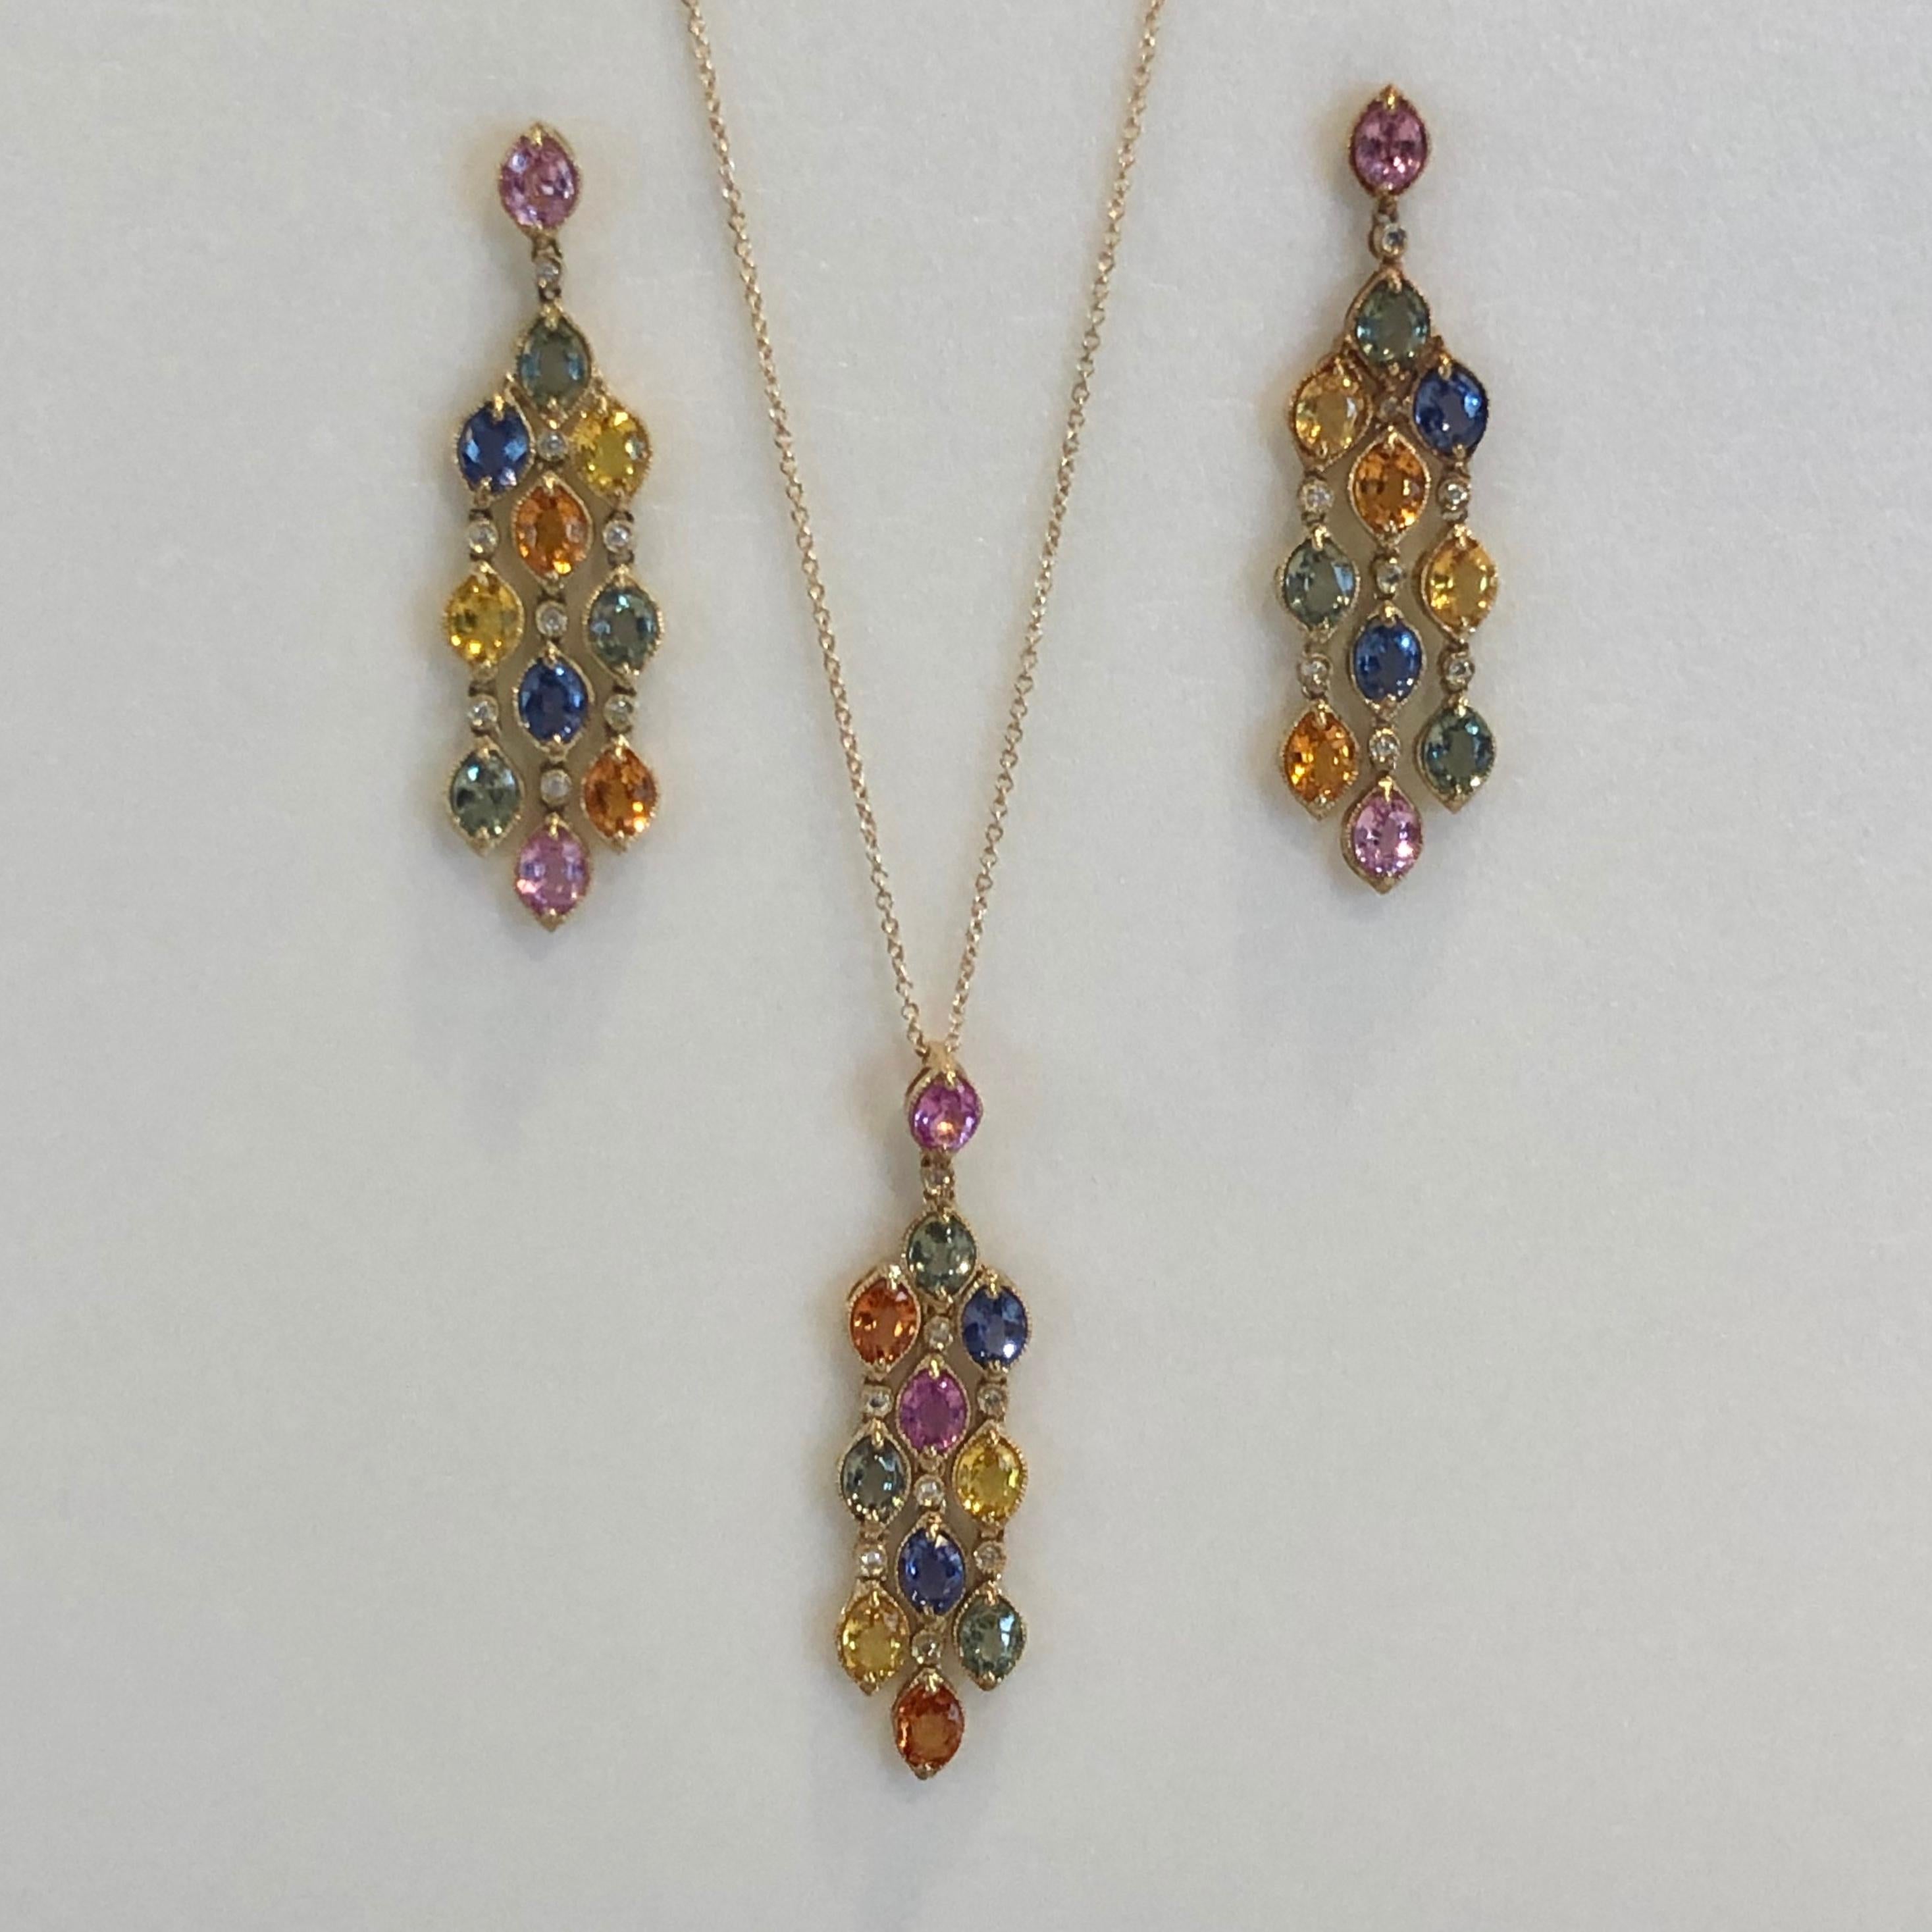 A great set, pair of sapphire and diamond chandelier earrings with a pendant 14.50 carats of multi-colored sapphire. The perfect timeless design for an impressive yet wearable set.
14.50ct. Natural Sapphires
Gorgeous brilliance
Fully Faceted Oval